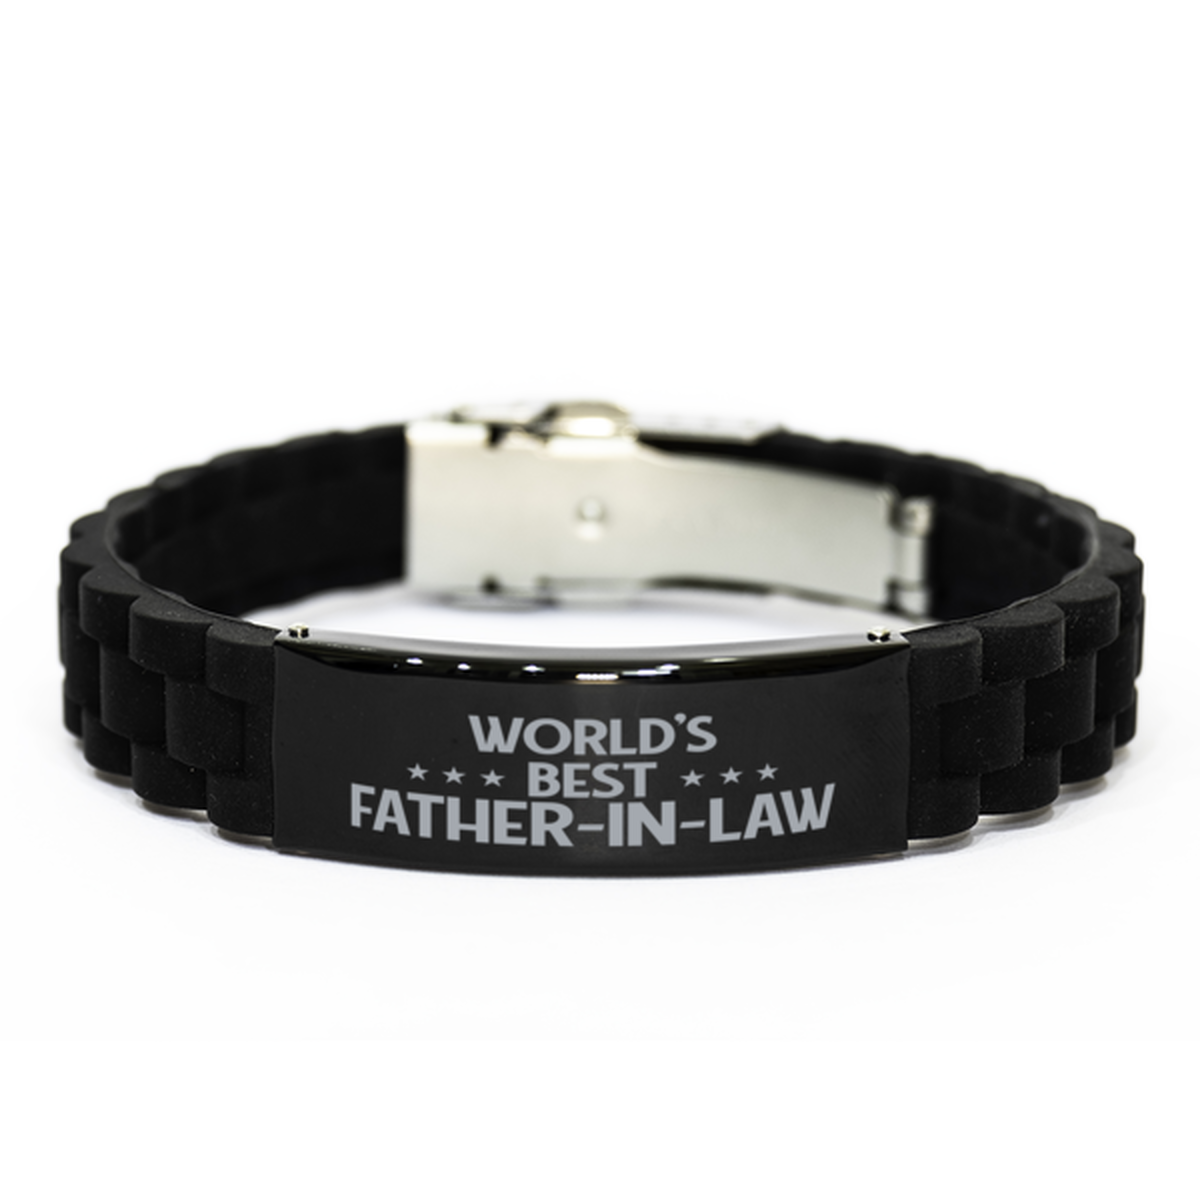 World's Best Father-in-law Gifts, Funny Black Engraved Bracelet For Father-in-law, Family Gifts For Men